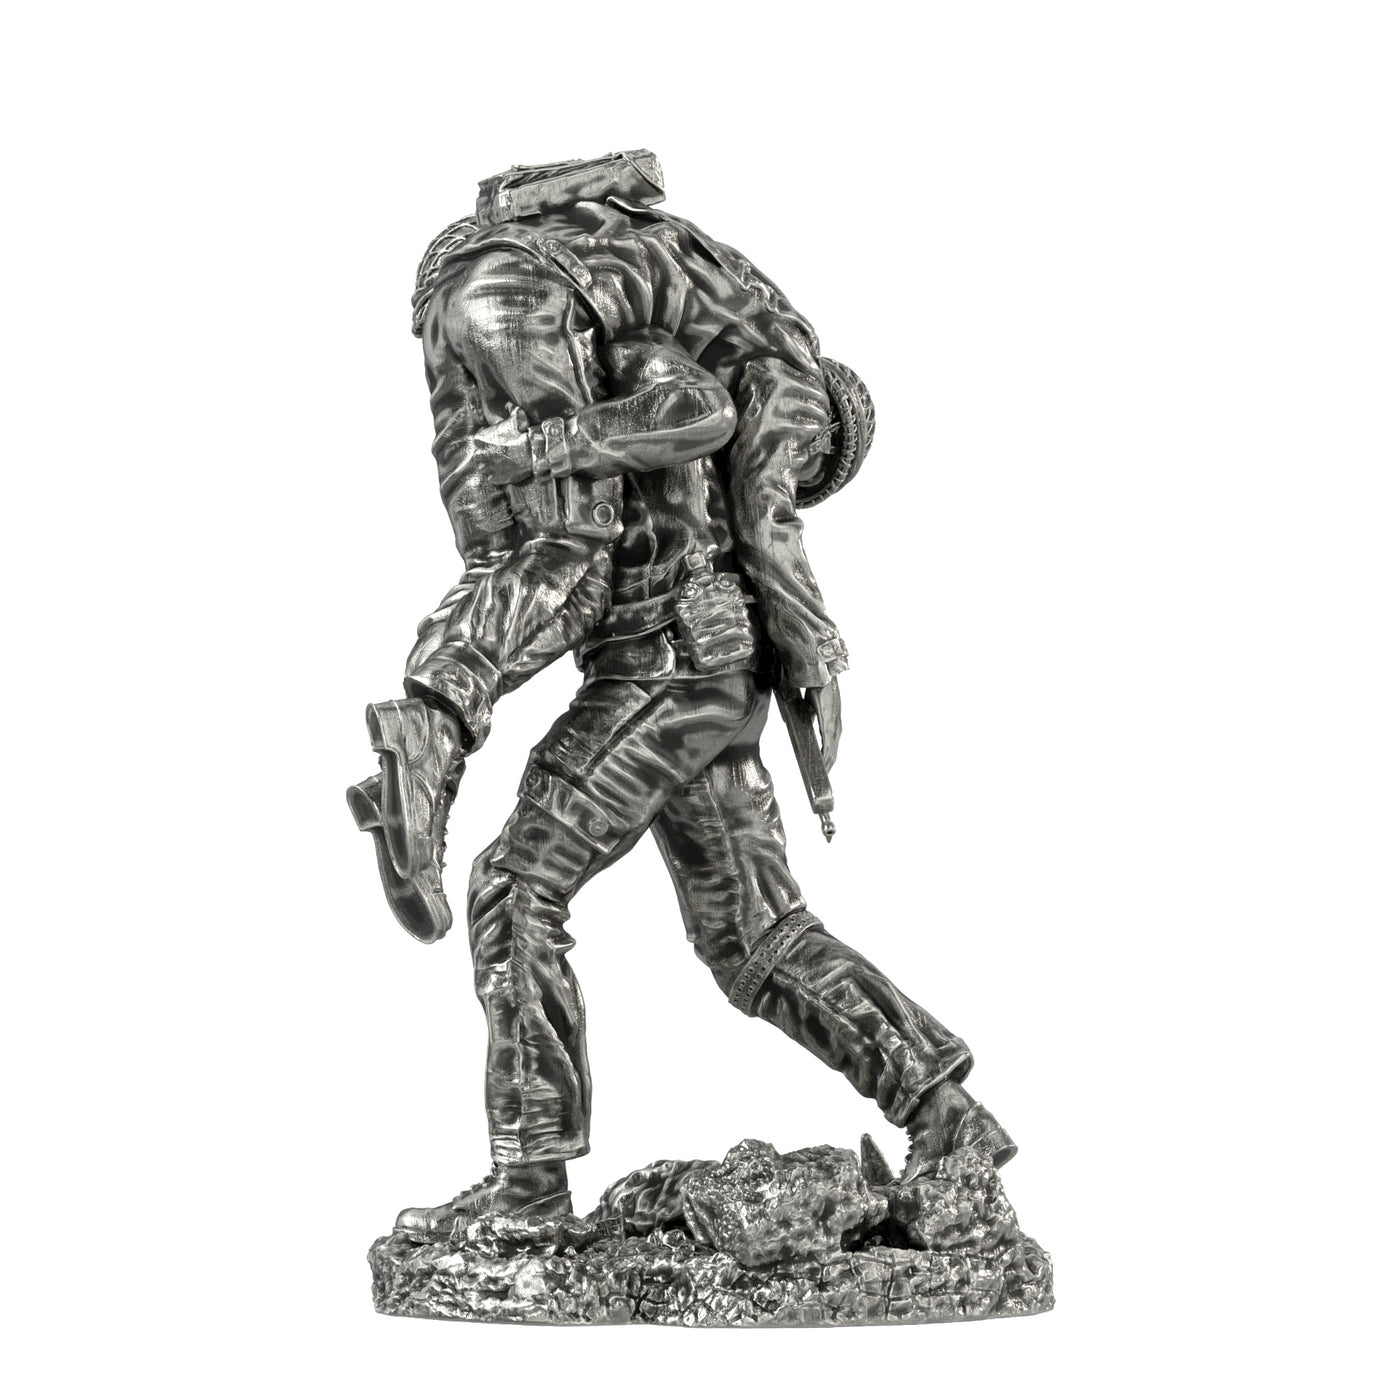 The Wounded Soldier - Silver Soldier - SilverStatues.com